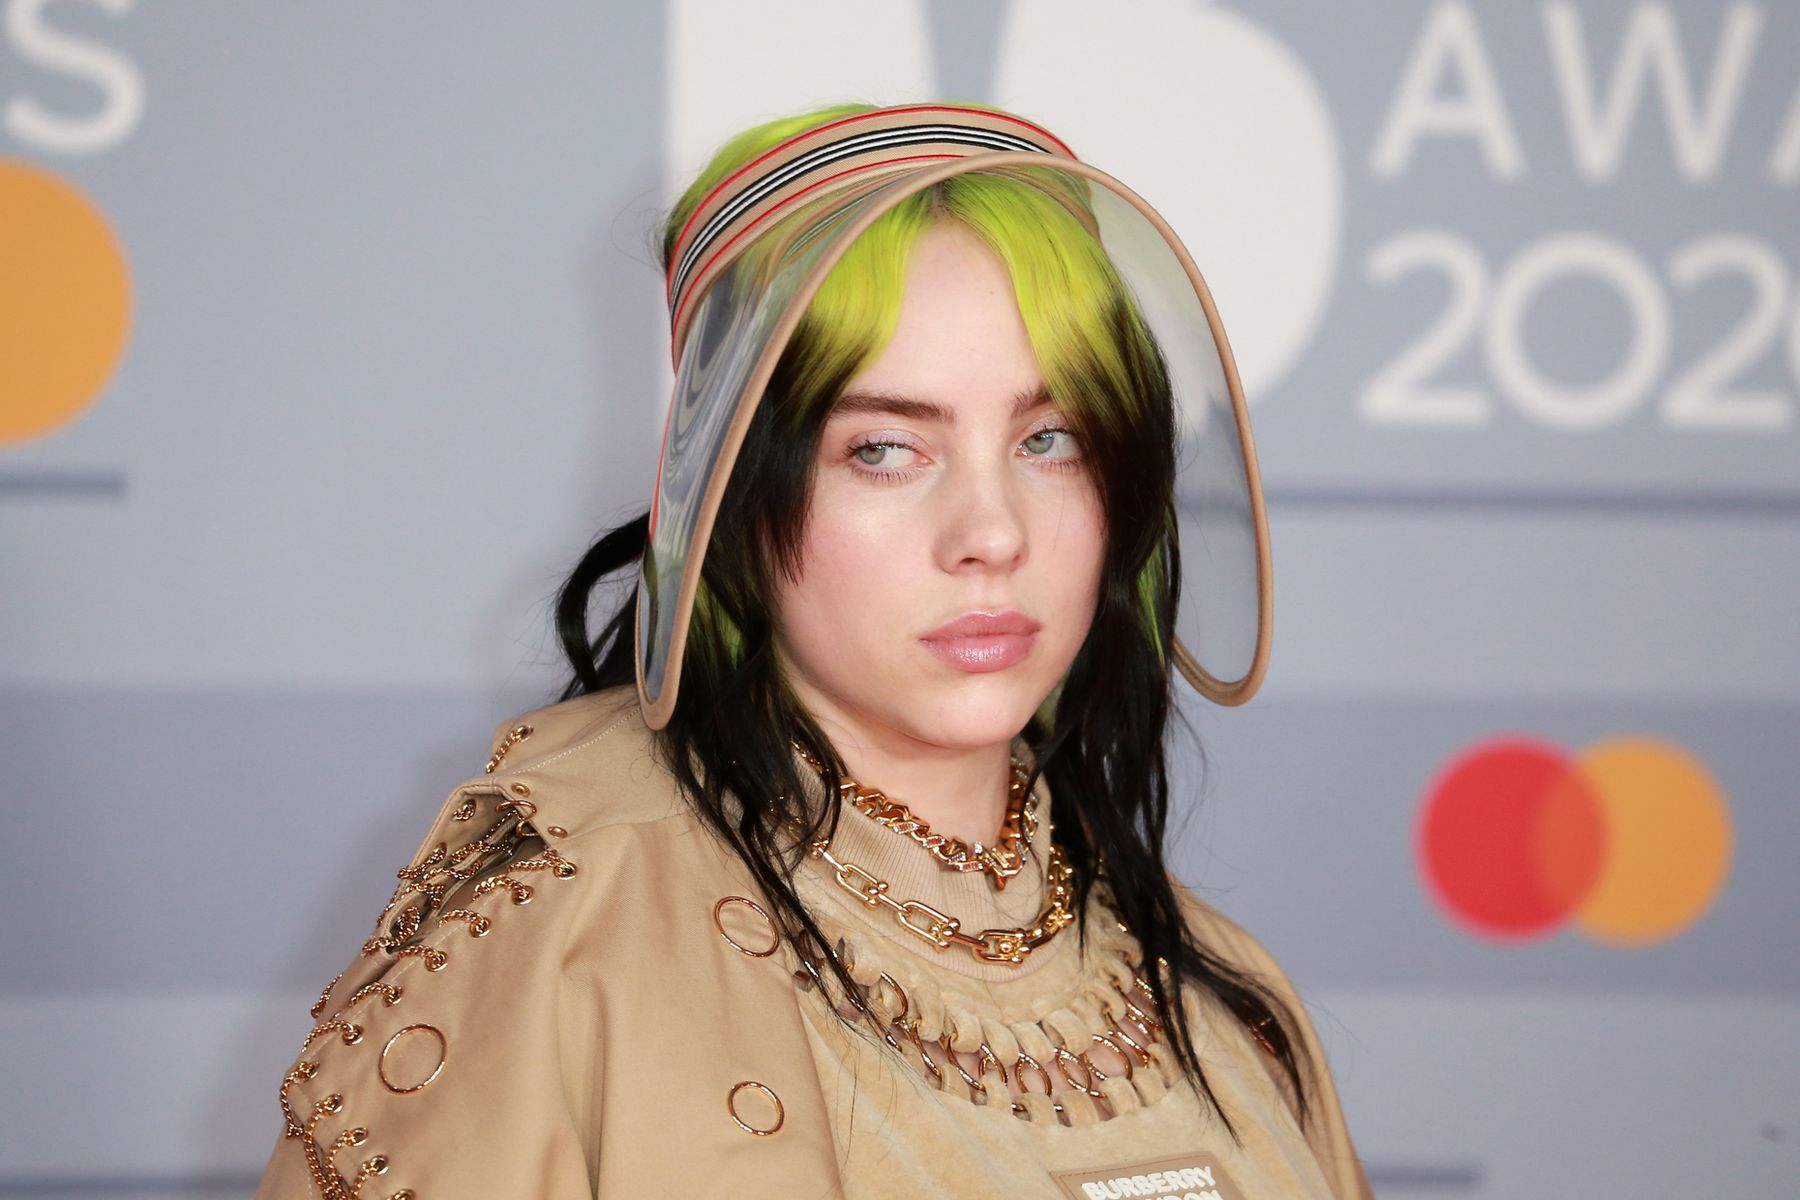 <p>The singer is only 20 years old, but has already developed an <a href="https://www.globalcitizen.org/en/content/billie-eilish-global-citizen-profile/" rel="noreferrer noopener">interesting history of activism</a>. At 18, she sang live at the National Democratic Convention, followed by a <a href="https://variety.com/2020/music/news/billie-eilish-anti-trump-speech-dnc-democratic-national-convention-watch-video-1234740733/" rel="noreferrer noopener">short speech encouraging people to vote</a>: “We need leaders who will solve problems like climate change and covid—not deny them. Leaders who will fight against systemic racism and inequality.”<br><br>She also proudly declared her support for the Black Lives Matter movement on Instagram in May 2021 and condemned those who countered it with “All lives matter.”</p>